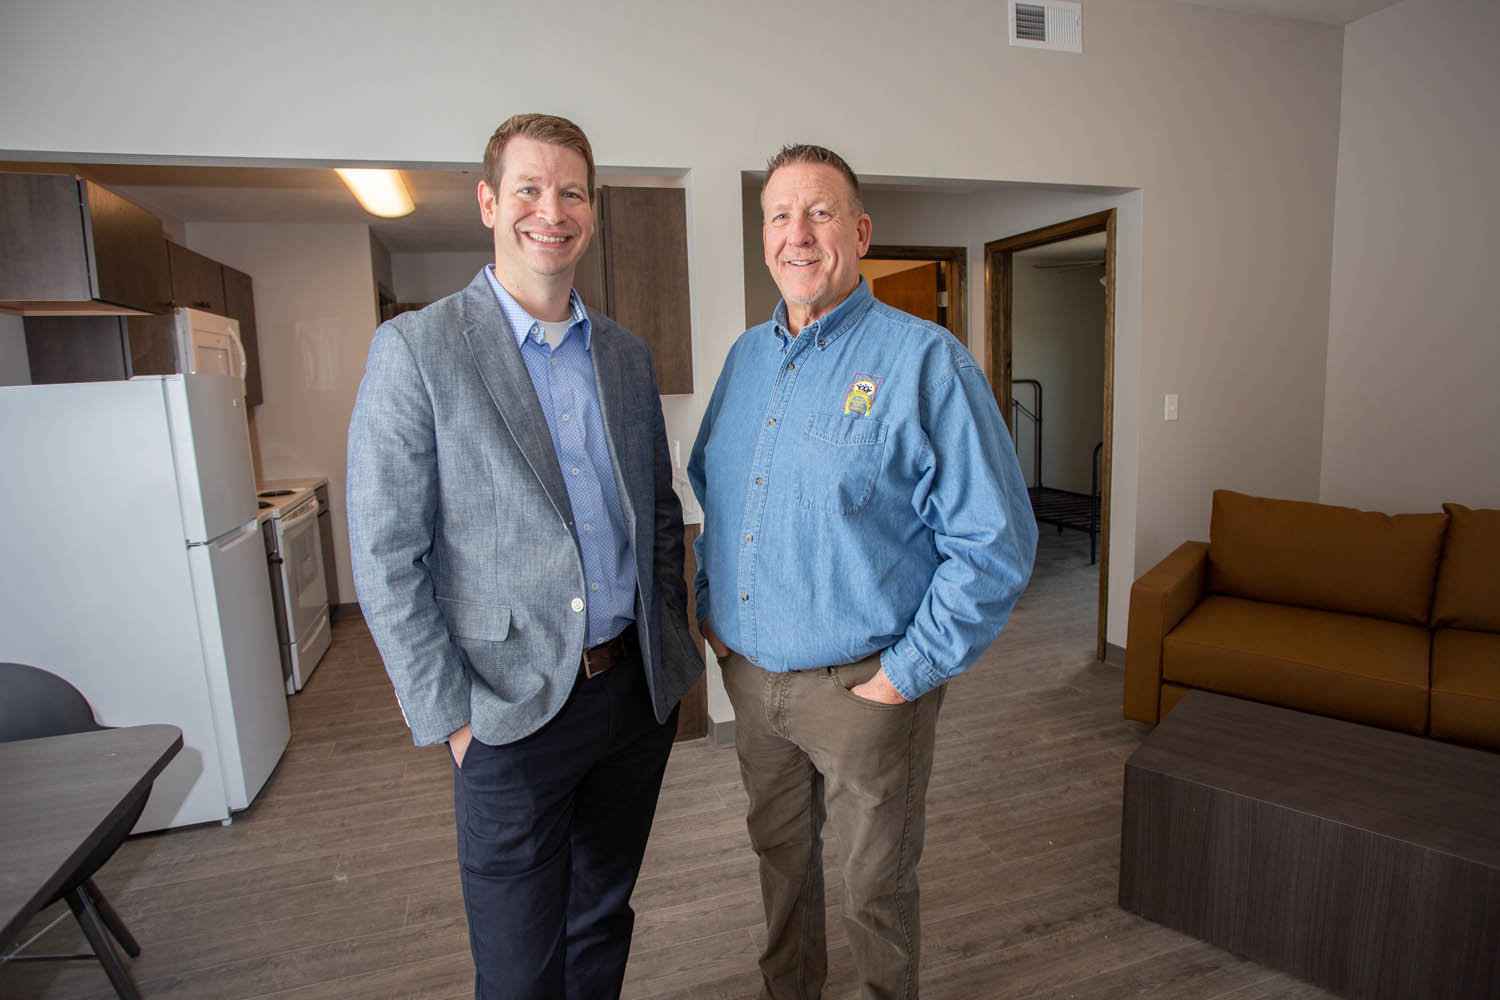 STAFF SWITCH UP: Casey Wray, left, is succeeding Kevin Killian as president and CEO of Good Samaritan Boys Ranch.